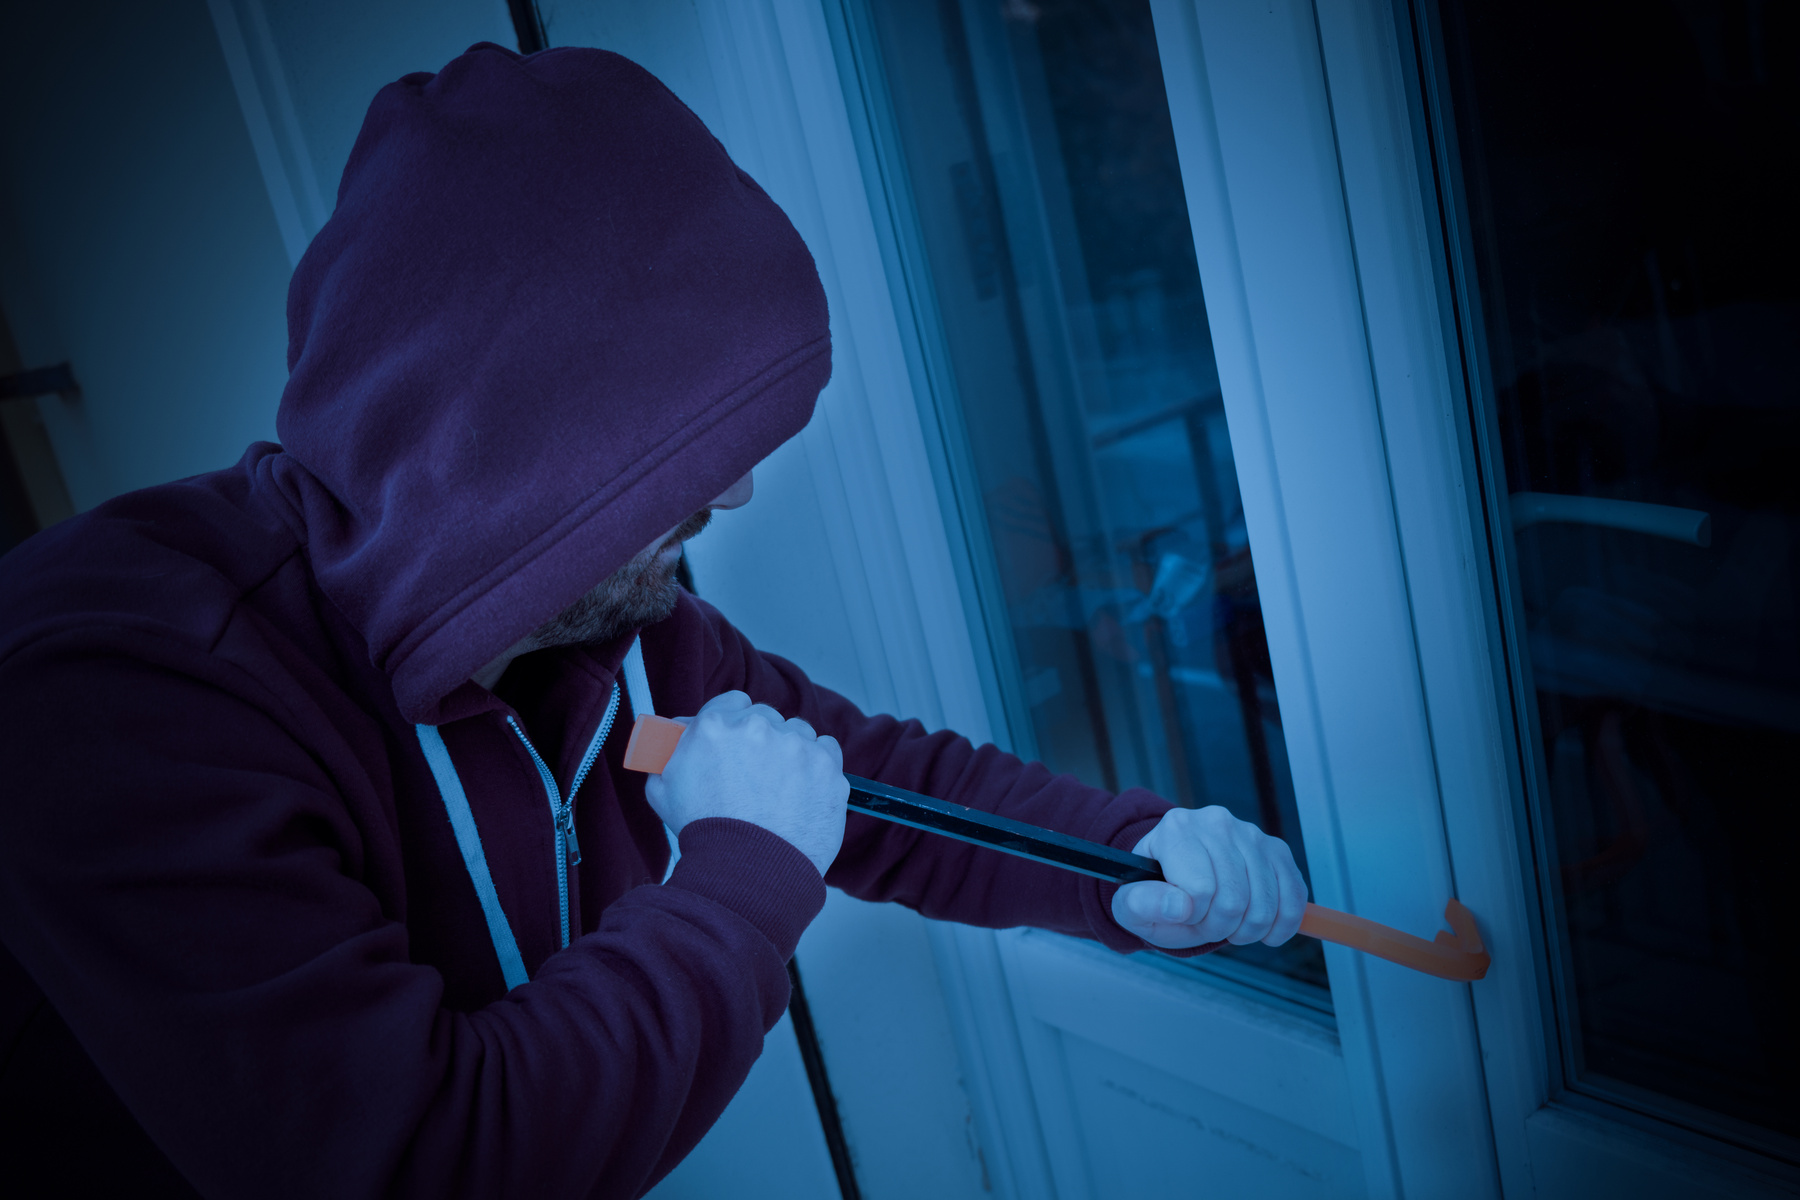 Hooded burglar forcing window to rob in the house